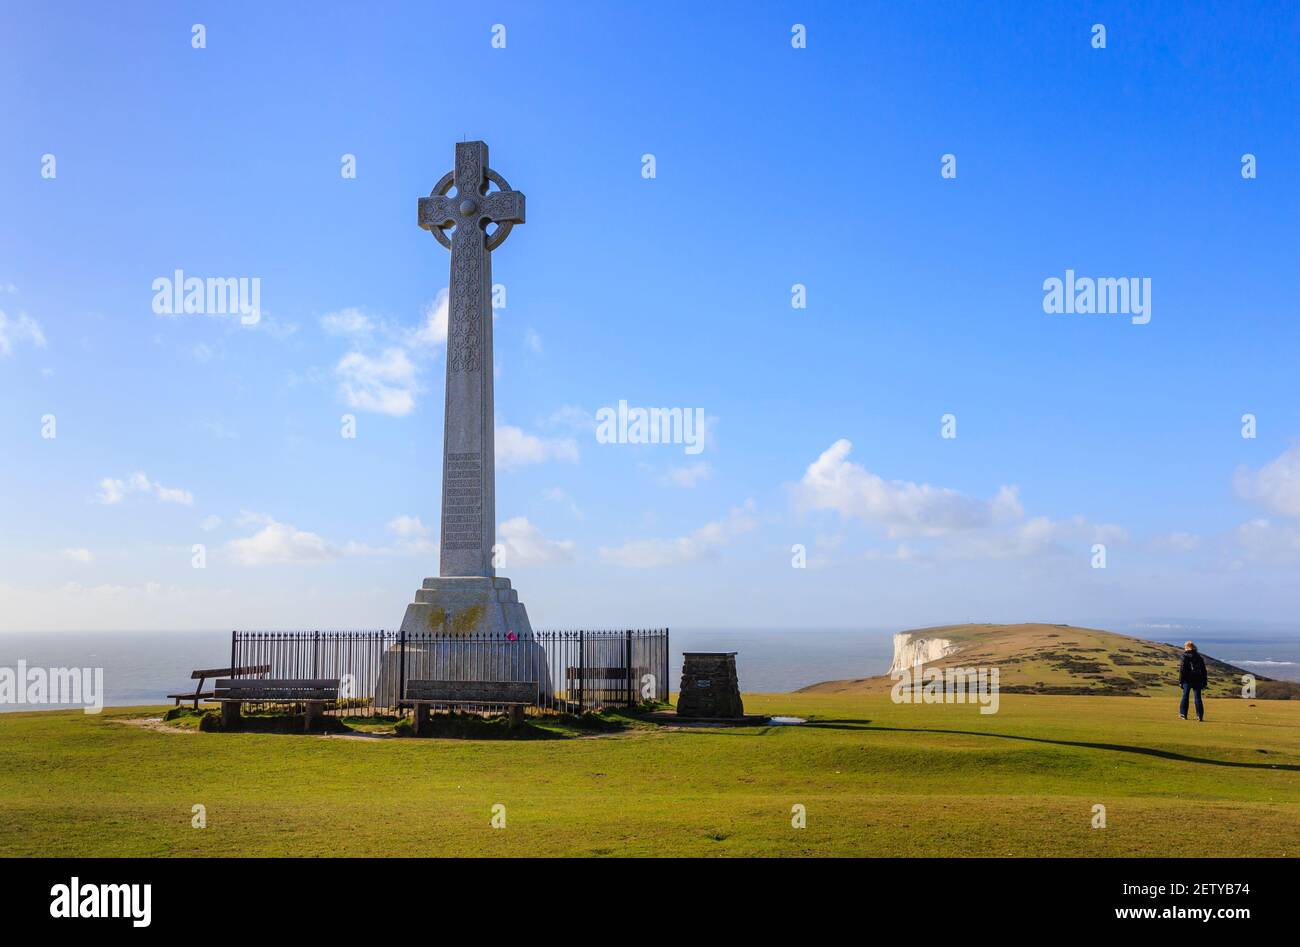 The Tennyson Memorial erecterd in 1897 on Tennyson Down in the Needles Country Park, Freshwater, Isle of Wight, southern England, against a blue sky Stock Photo